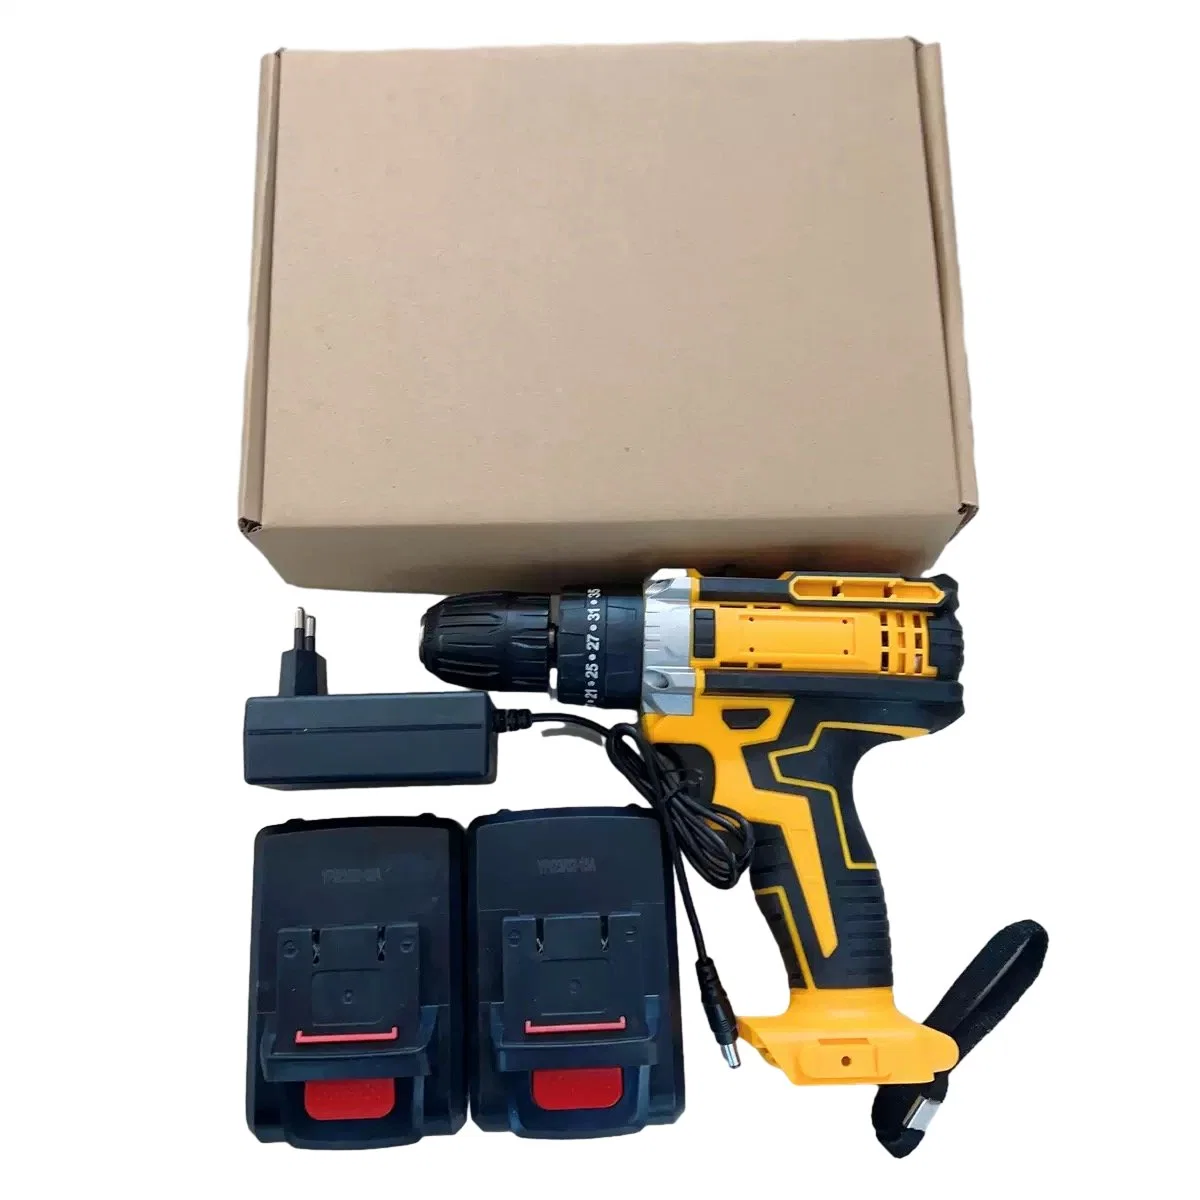 Ultimate Power Drill Set with Impact Feature